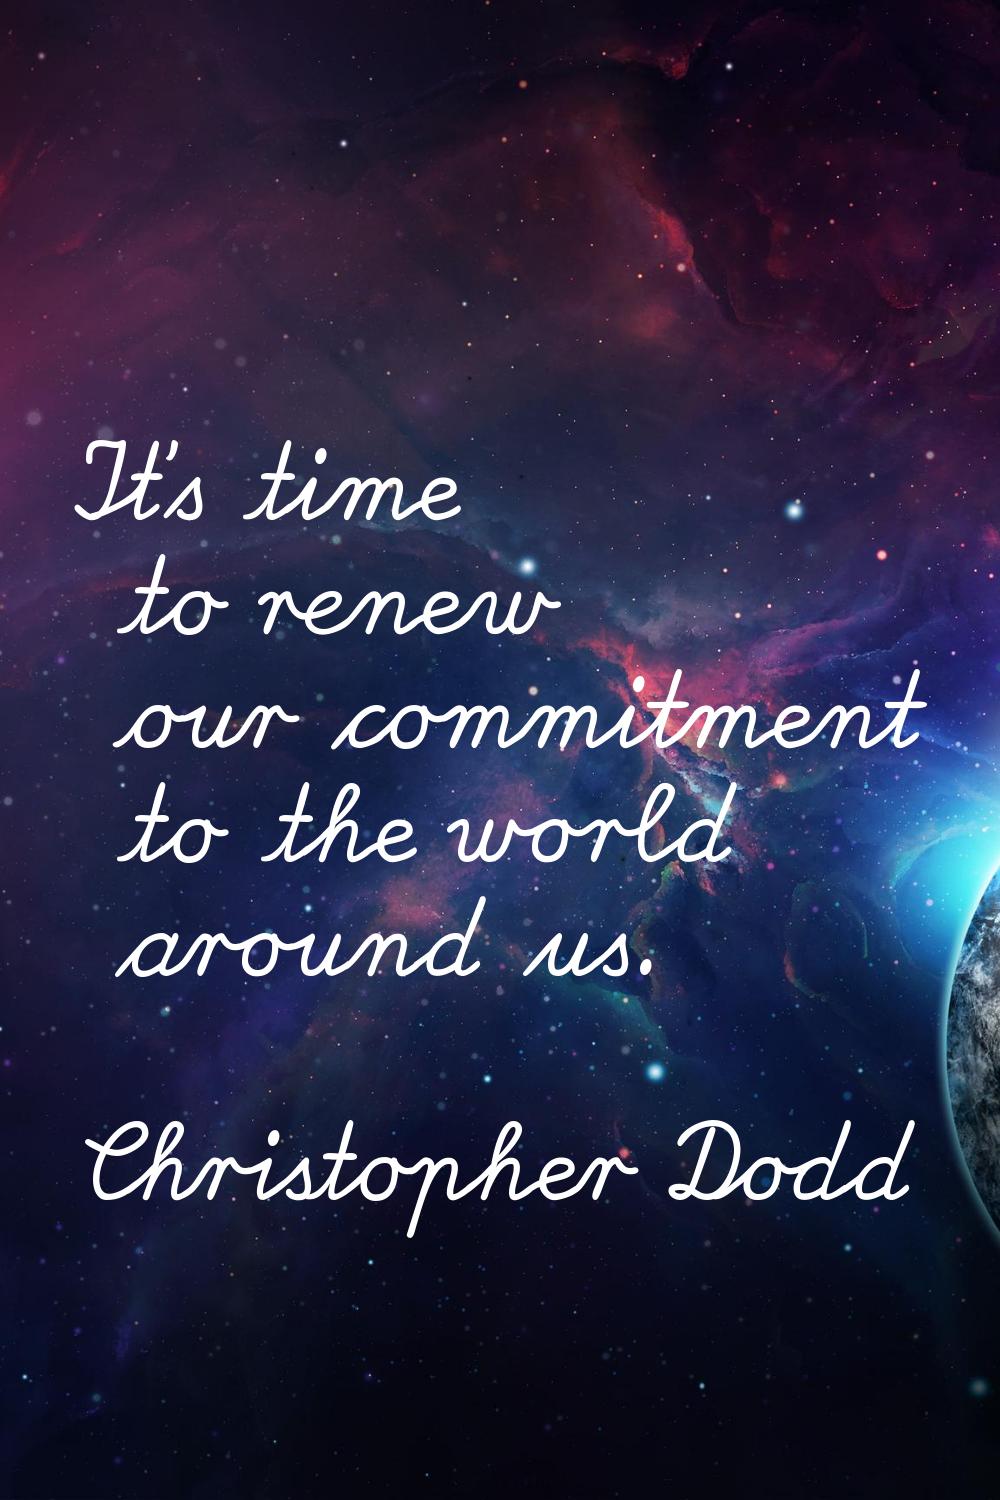 It's time to renew our commitment to the world around us.